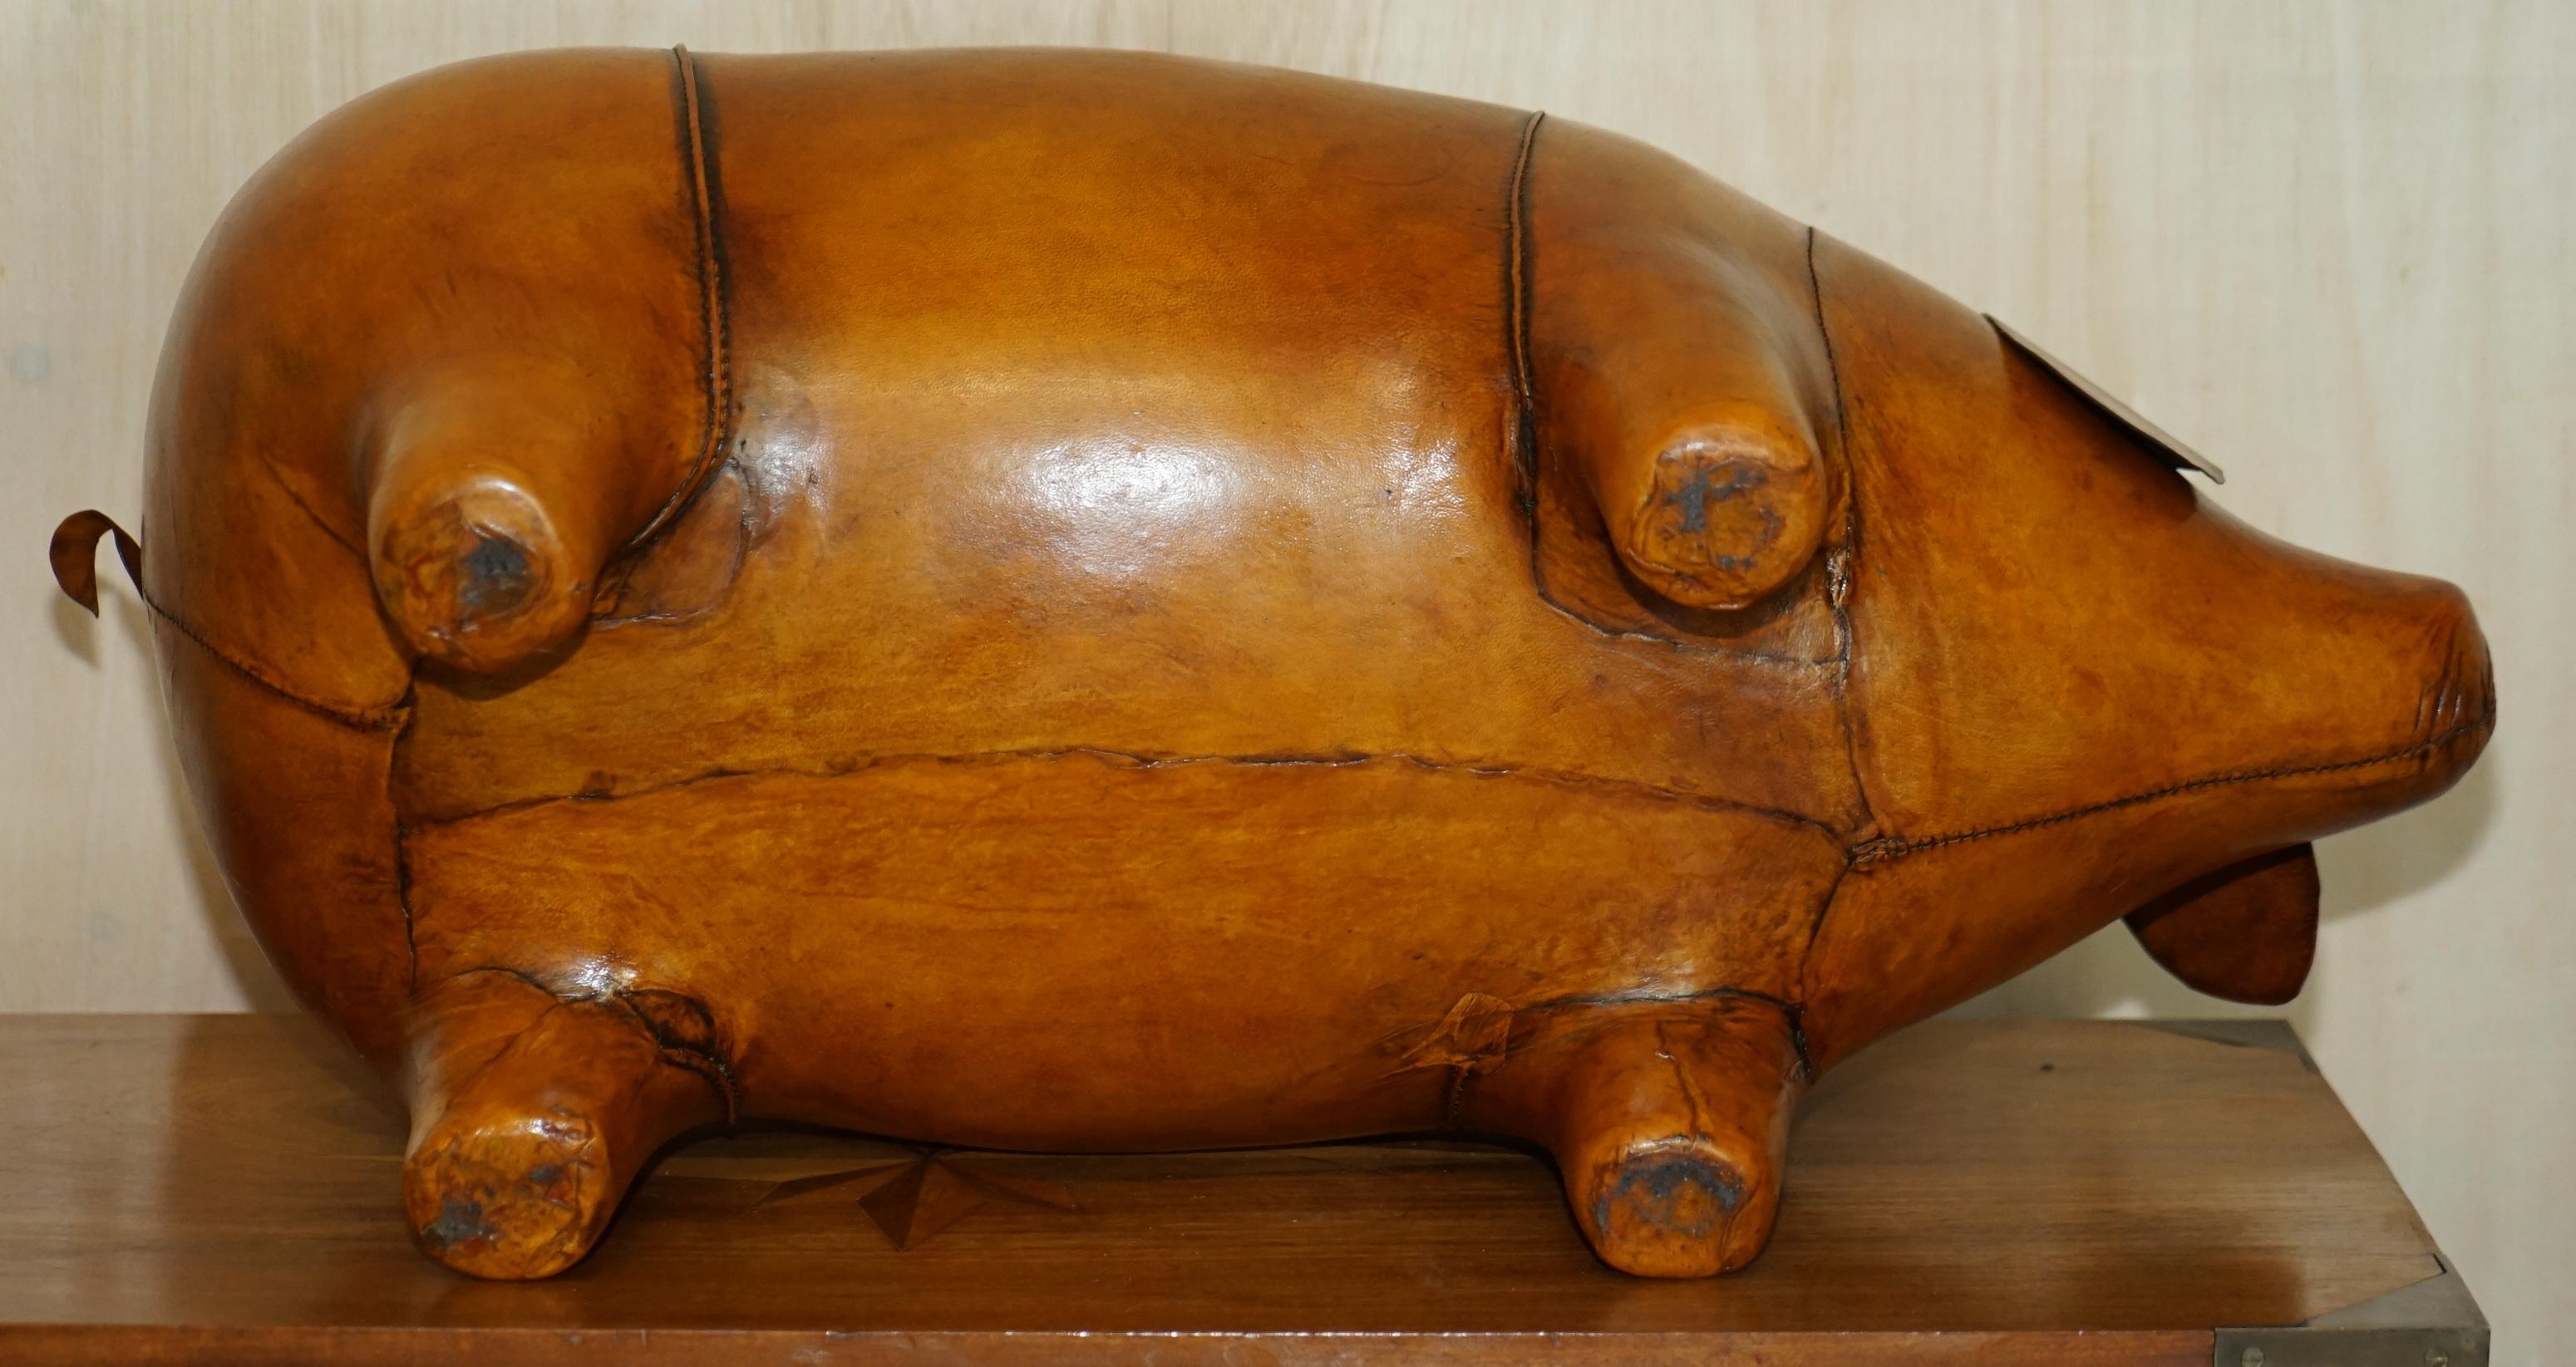 NEUES OLD STOCK LIBERTY Style OMERSA BROWN LEATHER PIG FOOTSTOOL LARGE AND MEDiUM im Angebot 4